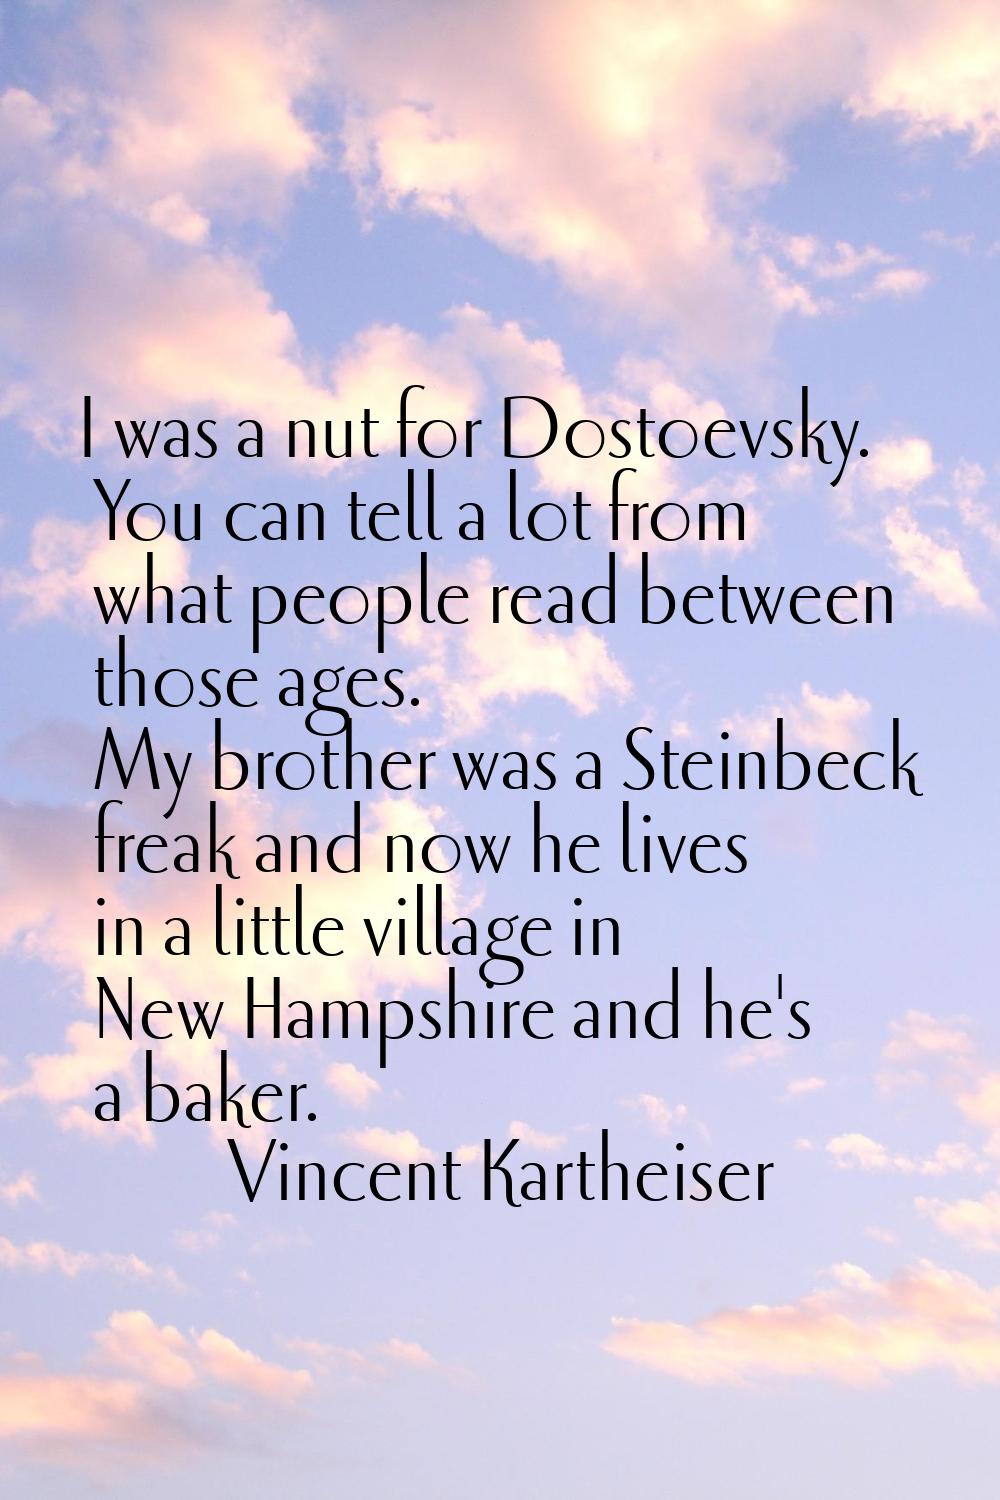 I was a nut for Dostoevsky. You can tell a lot from what people read between those ages. My brother